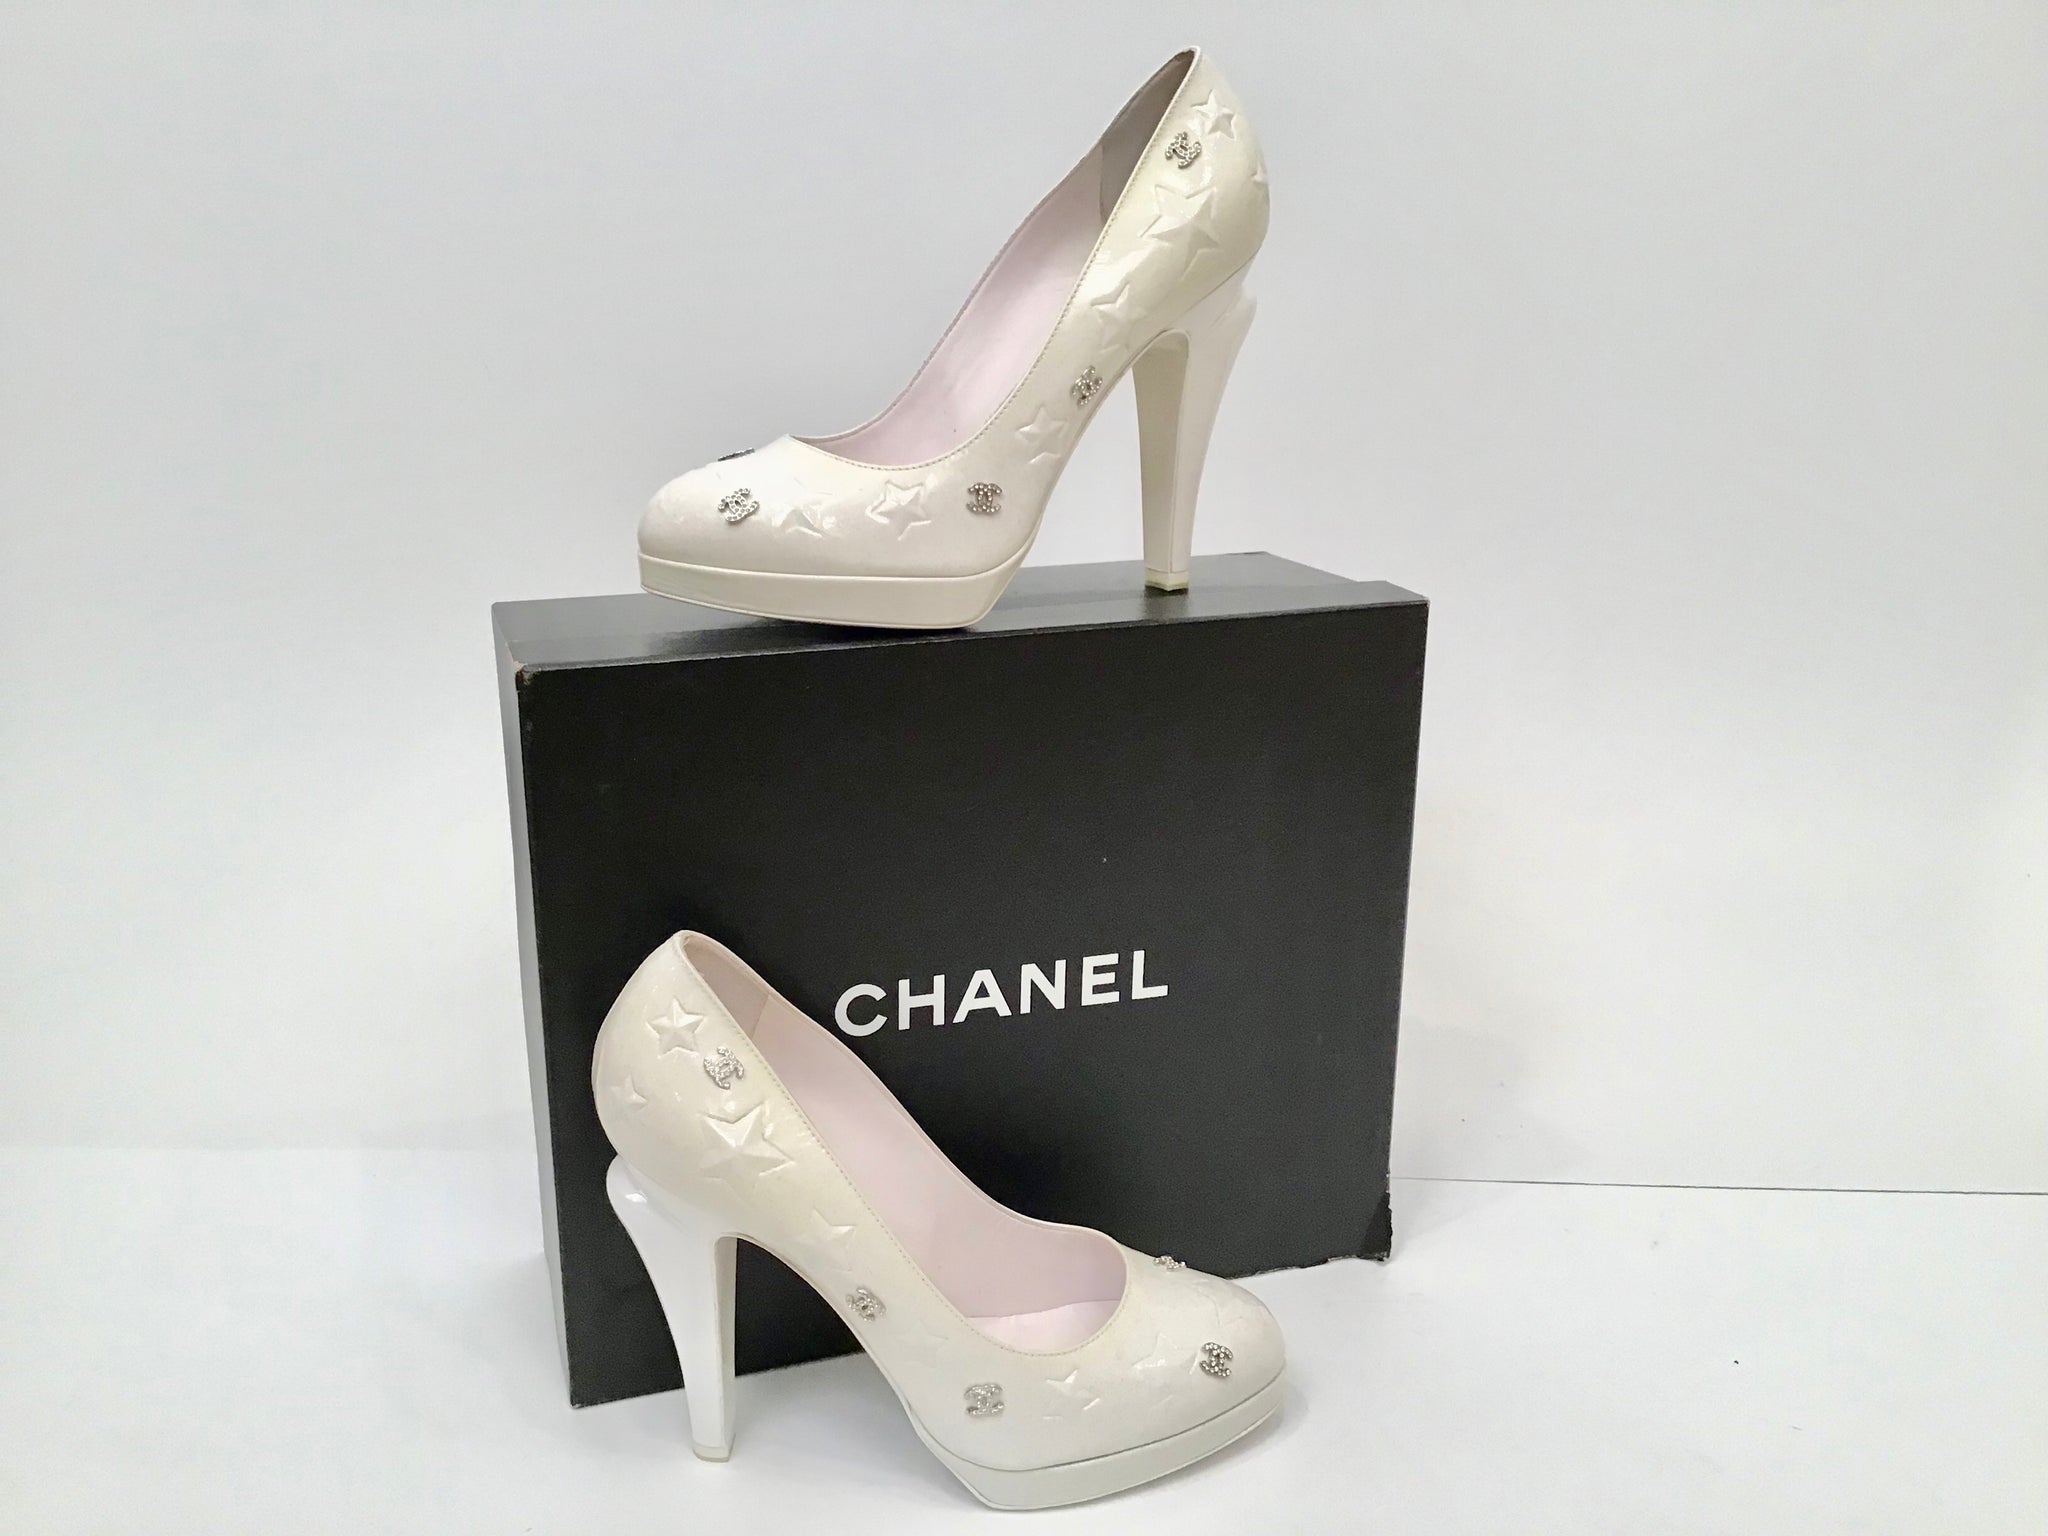 CHANEL, Shoes, Authentic Chanel Gold Crystal Sandals Cc Lucite Pvc Heels  Shoes Size 38 Wedding